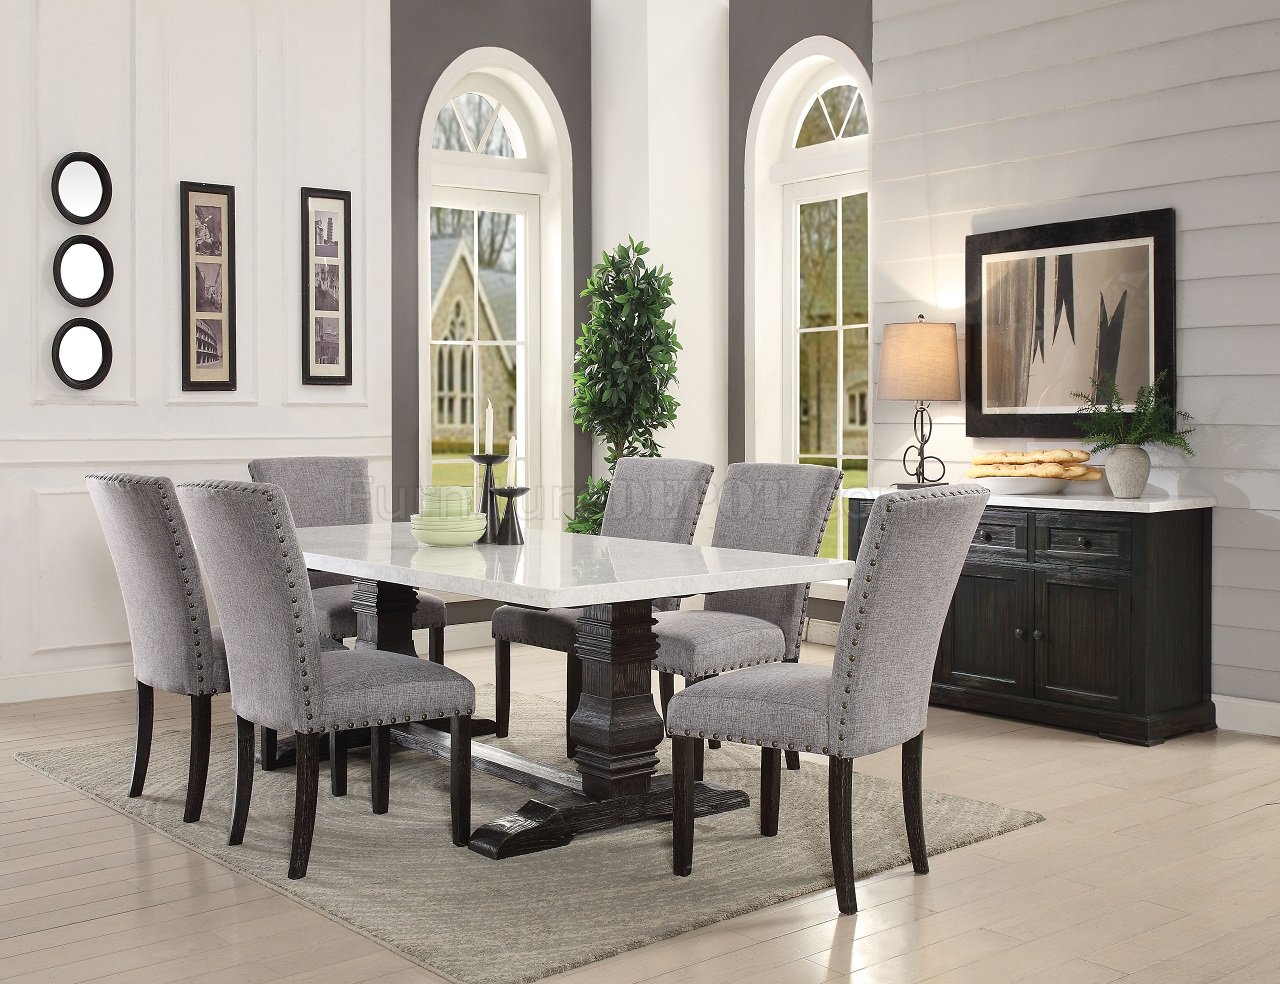 Recusson Marble Top Dining Table 60825 In Dark Oak By Acme